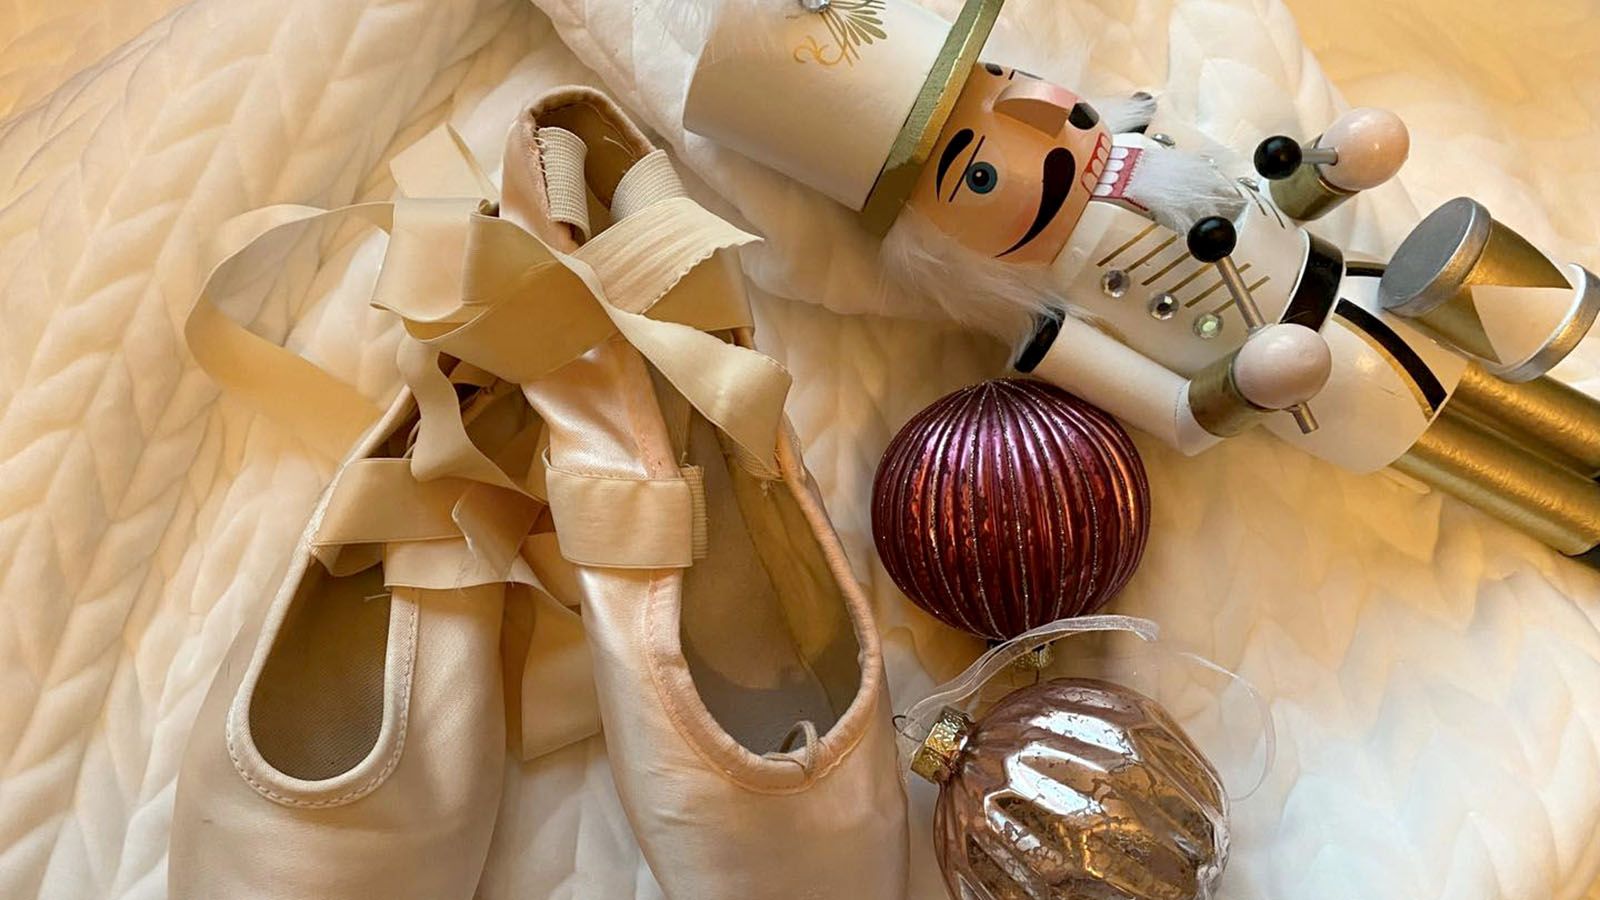 Project Ballet will present The Nutcracker at The Embassy on Dec. 2-3.